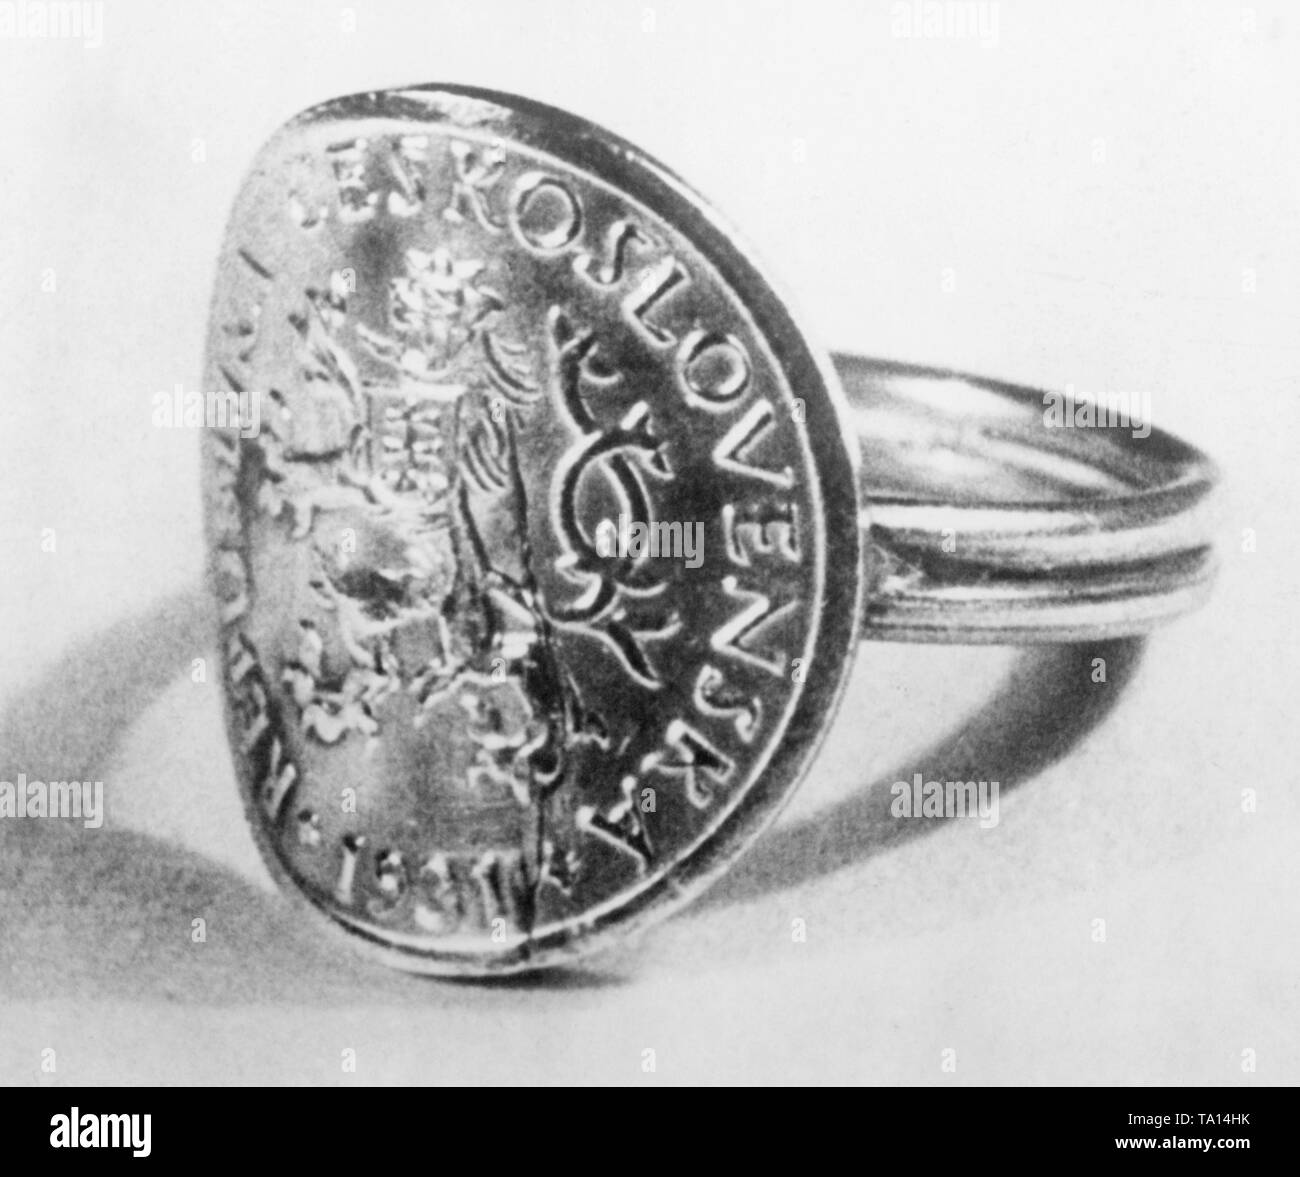 As a counterpart to the West Wall Ring, the Protectorate of Bohemia and Moravia had a Protectorate Ring. The ring has a 5-Heller coin at the front. Since March 1939, the areas of Bohemia and Moravia had been under German occupation. Stock Photo